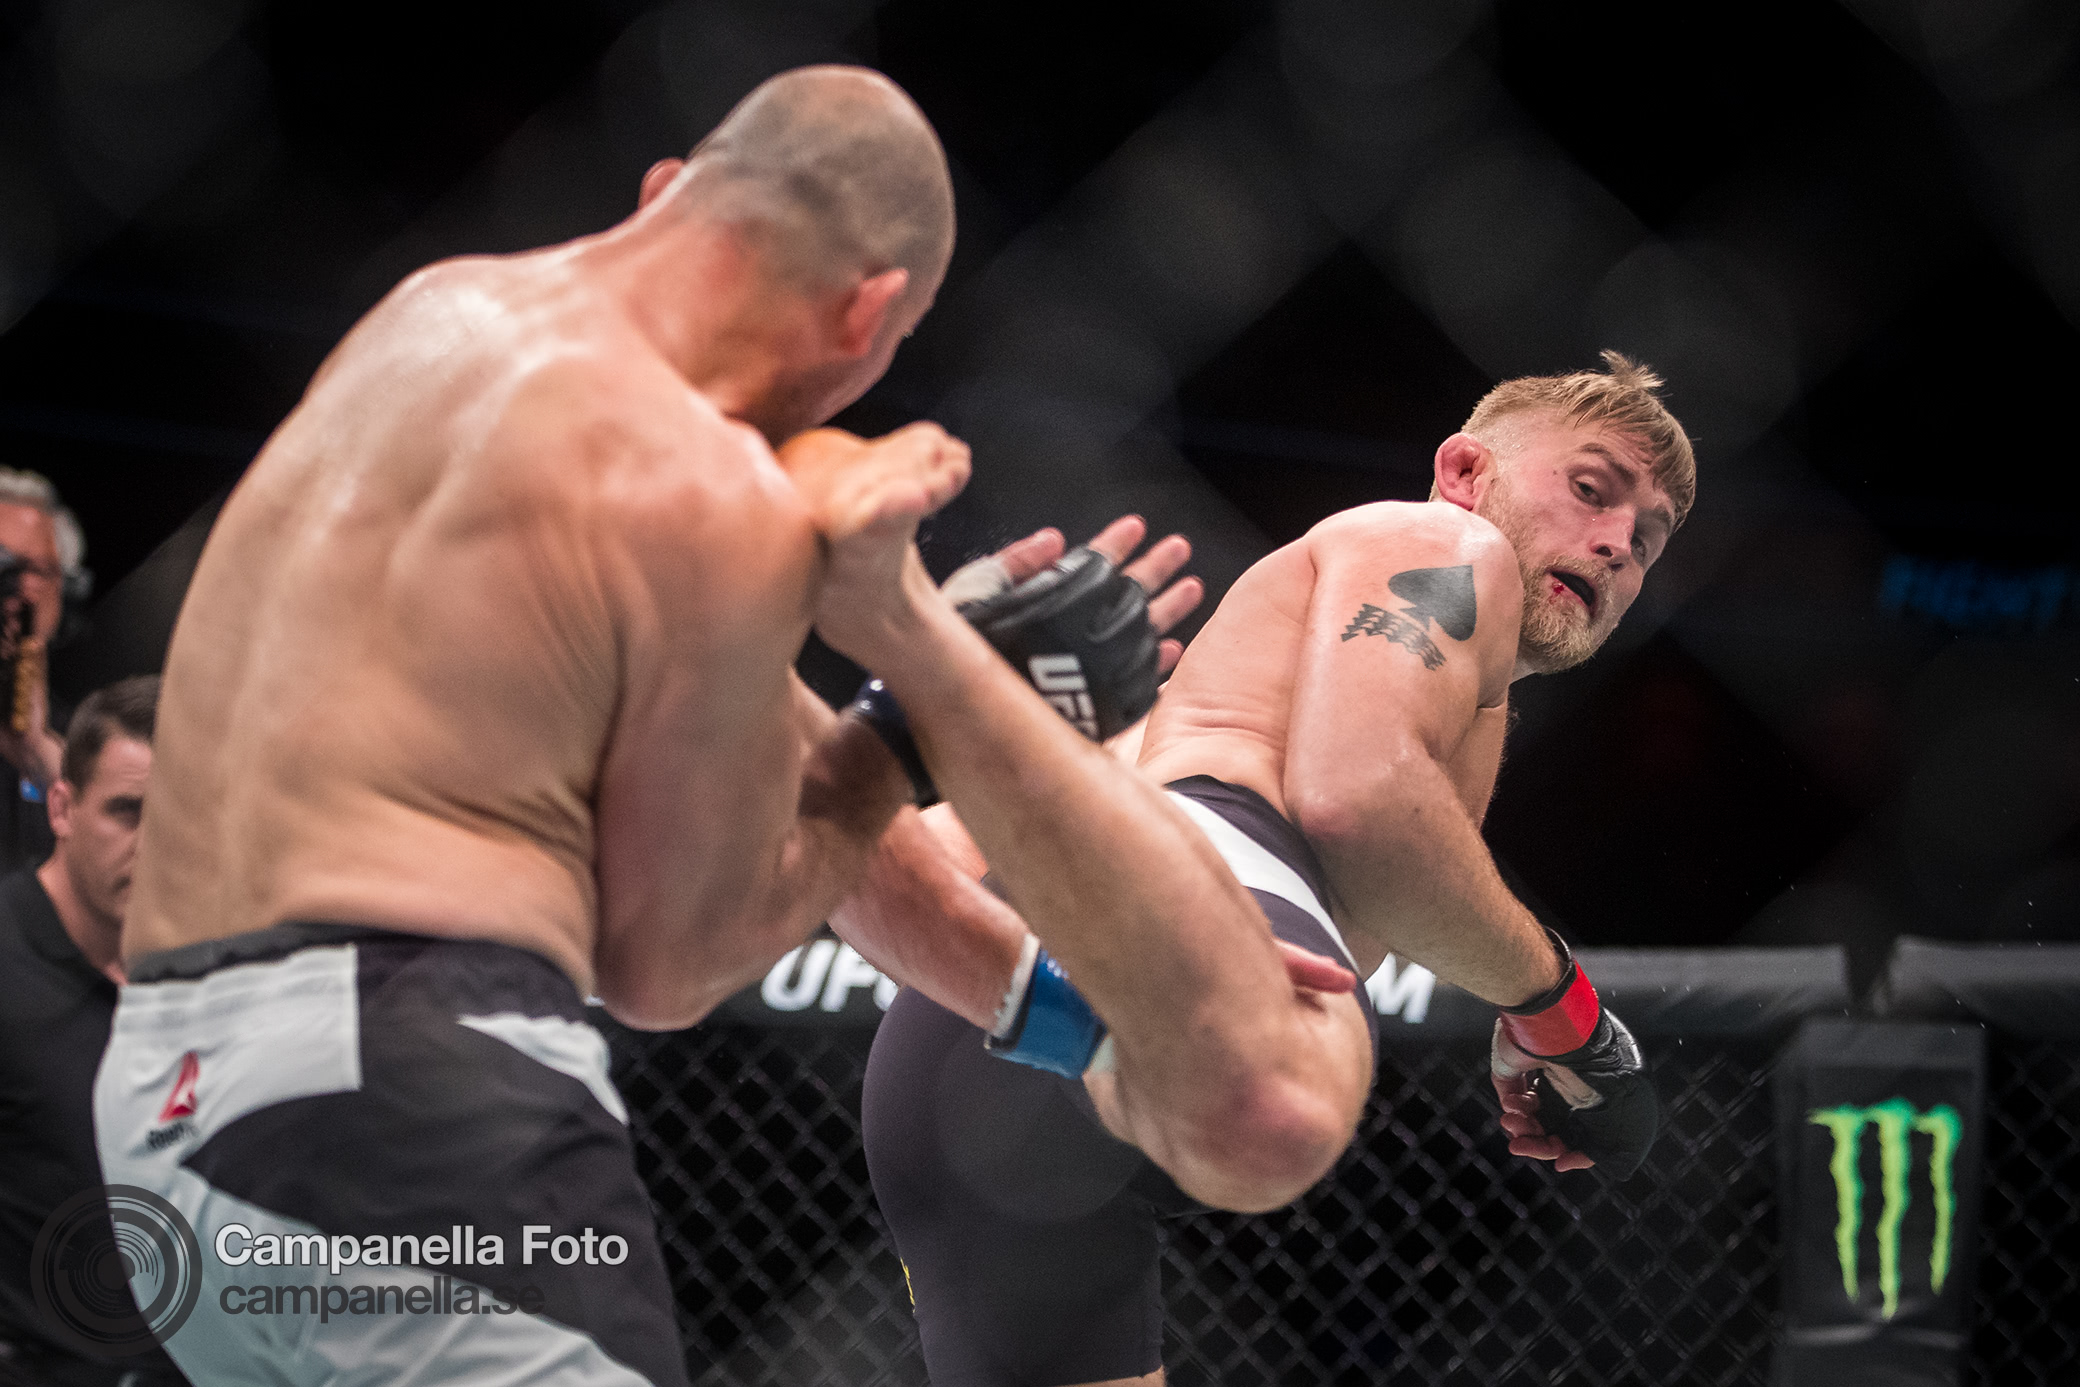 The Mauler back in action with the UFC - Michael Campanella Photography